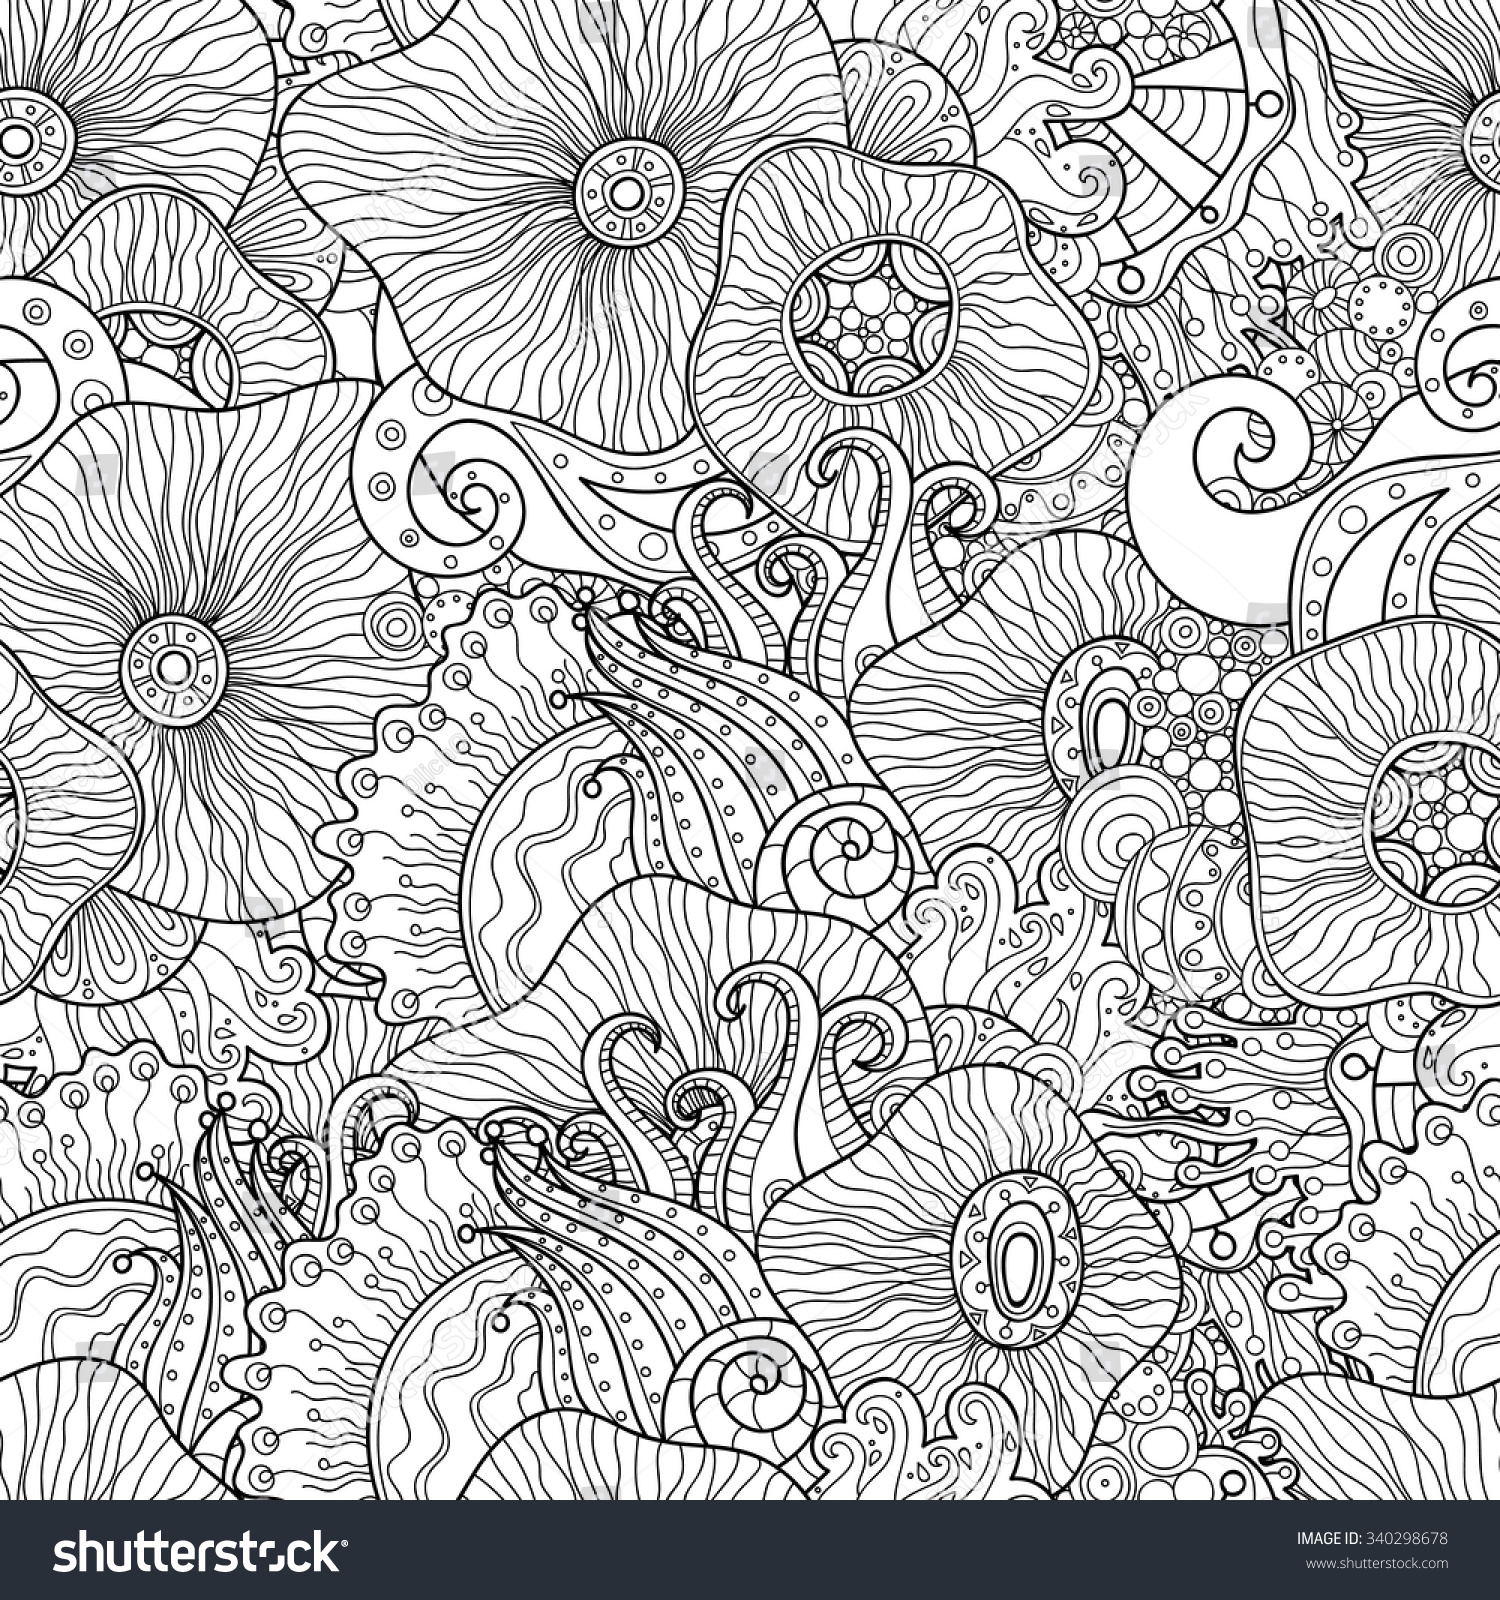 Doodle Black And White Abstract Hand-Drawn Background. Wavy Seamless ...